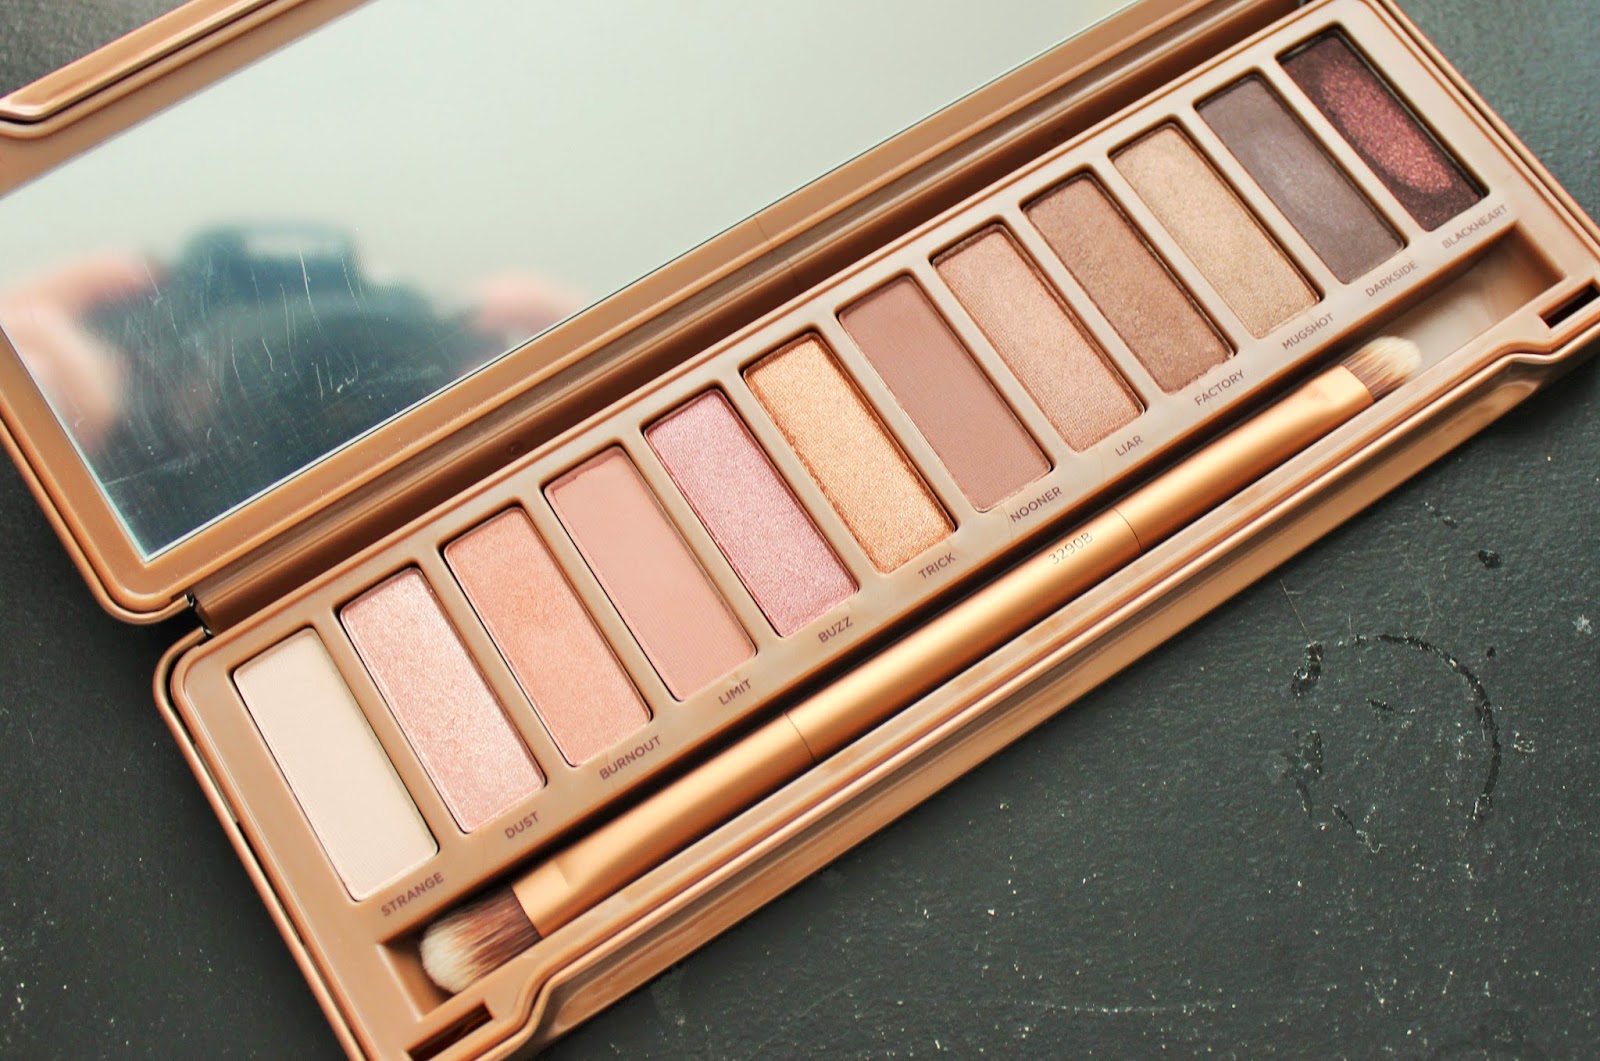 Urban Decay Naked 3 Palette Review Swatches Nik The Makeup Junkie 62010